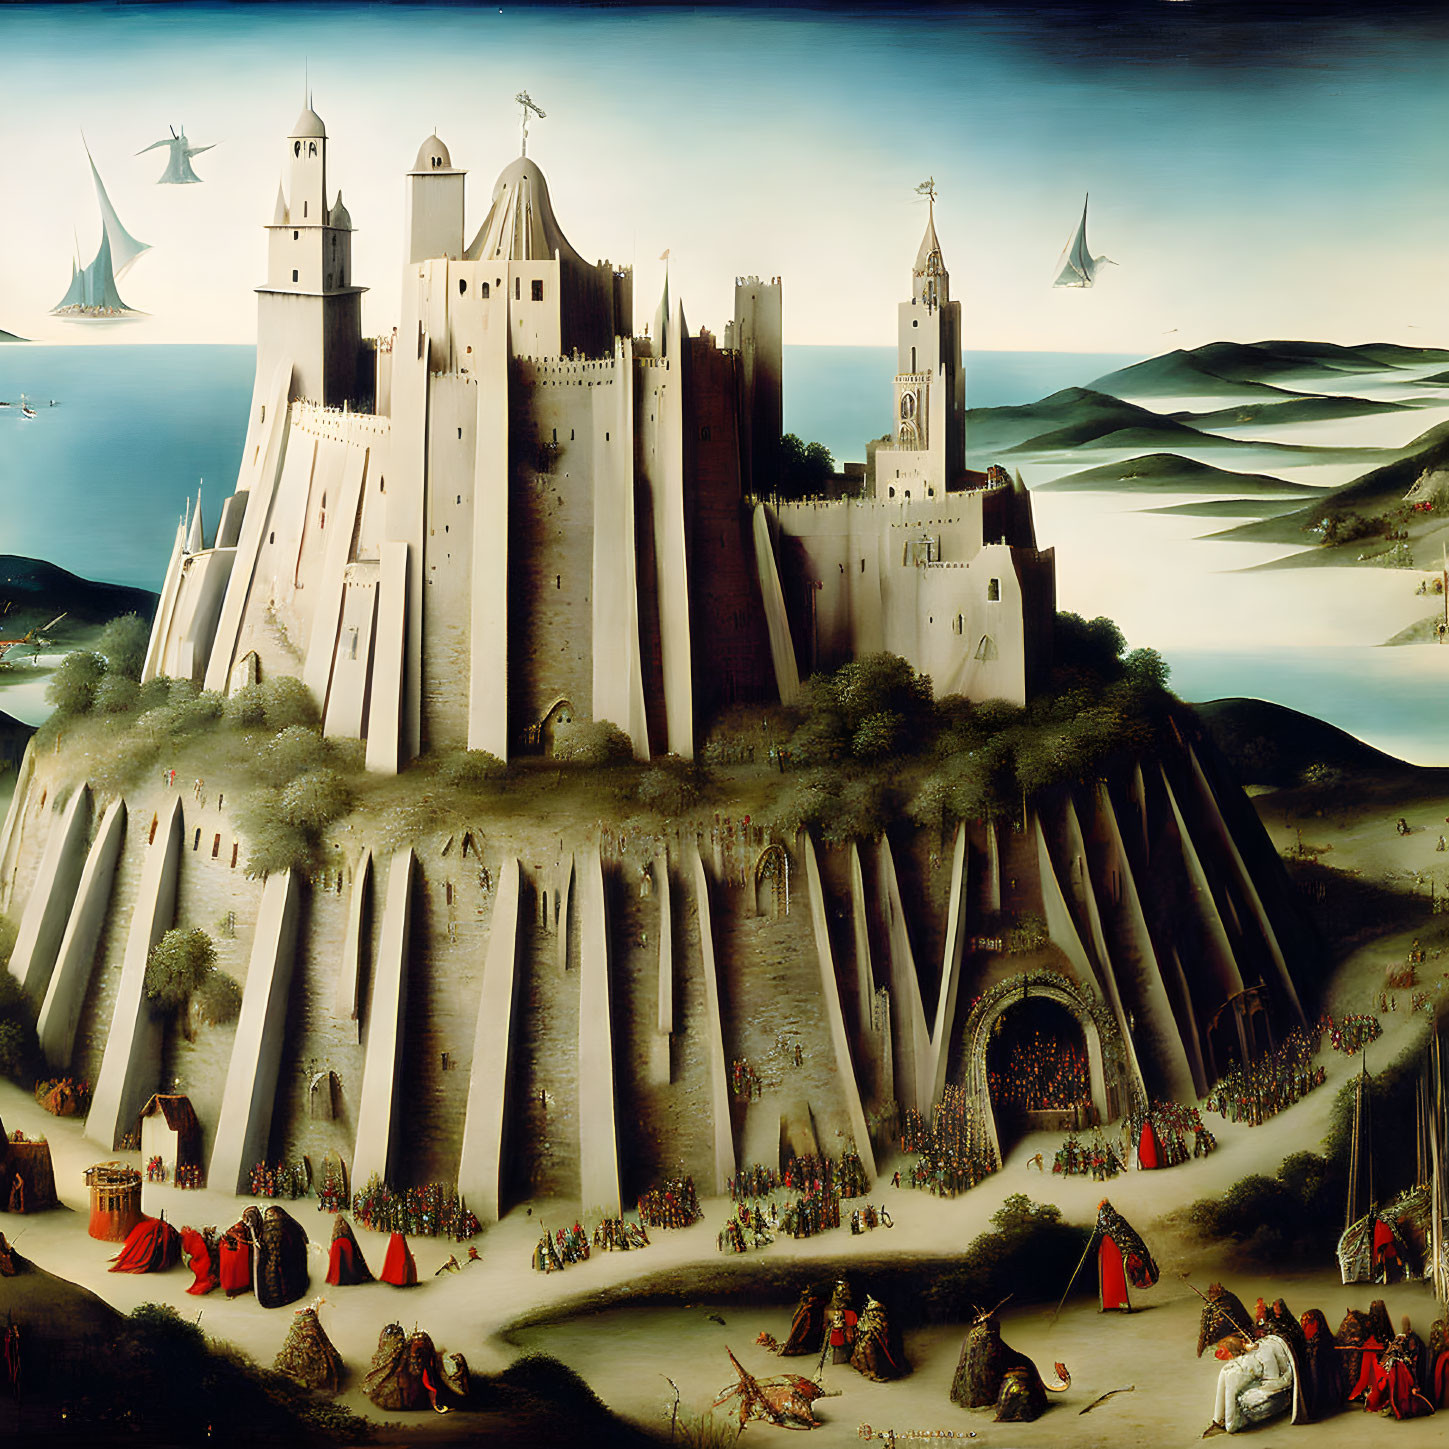 Medieval castle on rock surrounded by water and ships